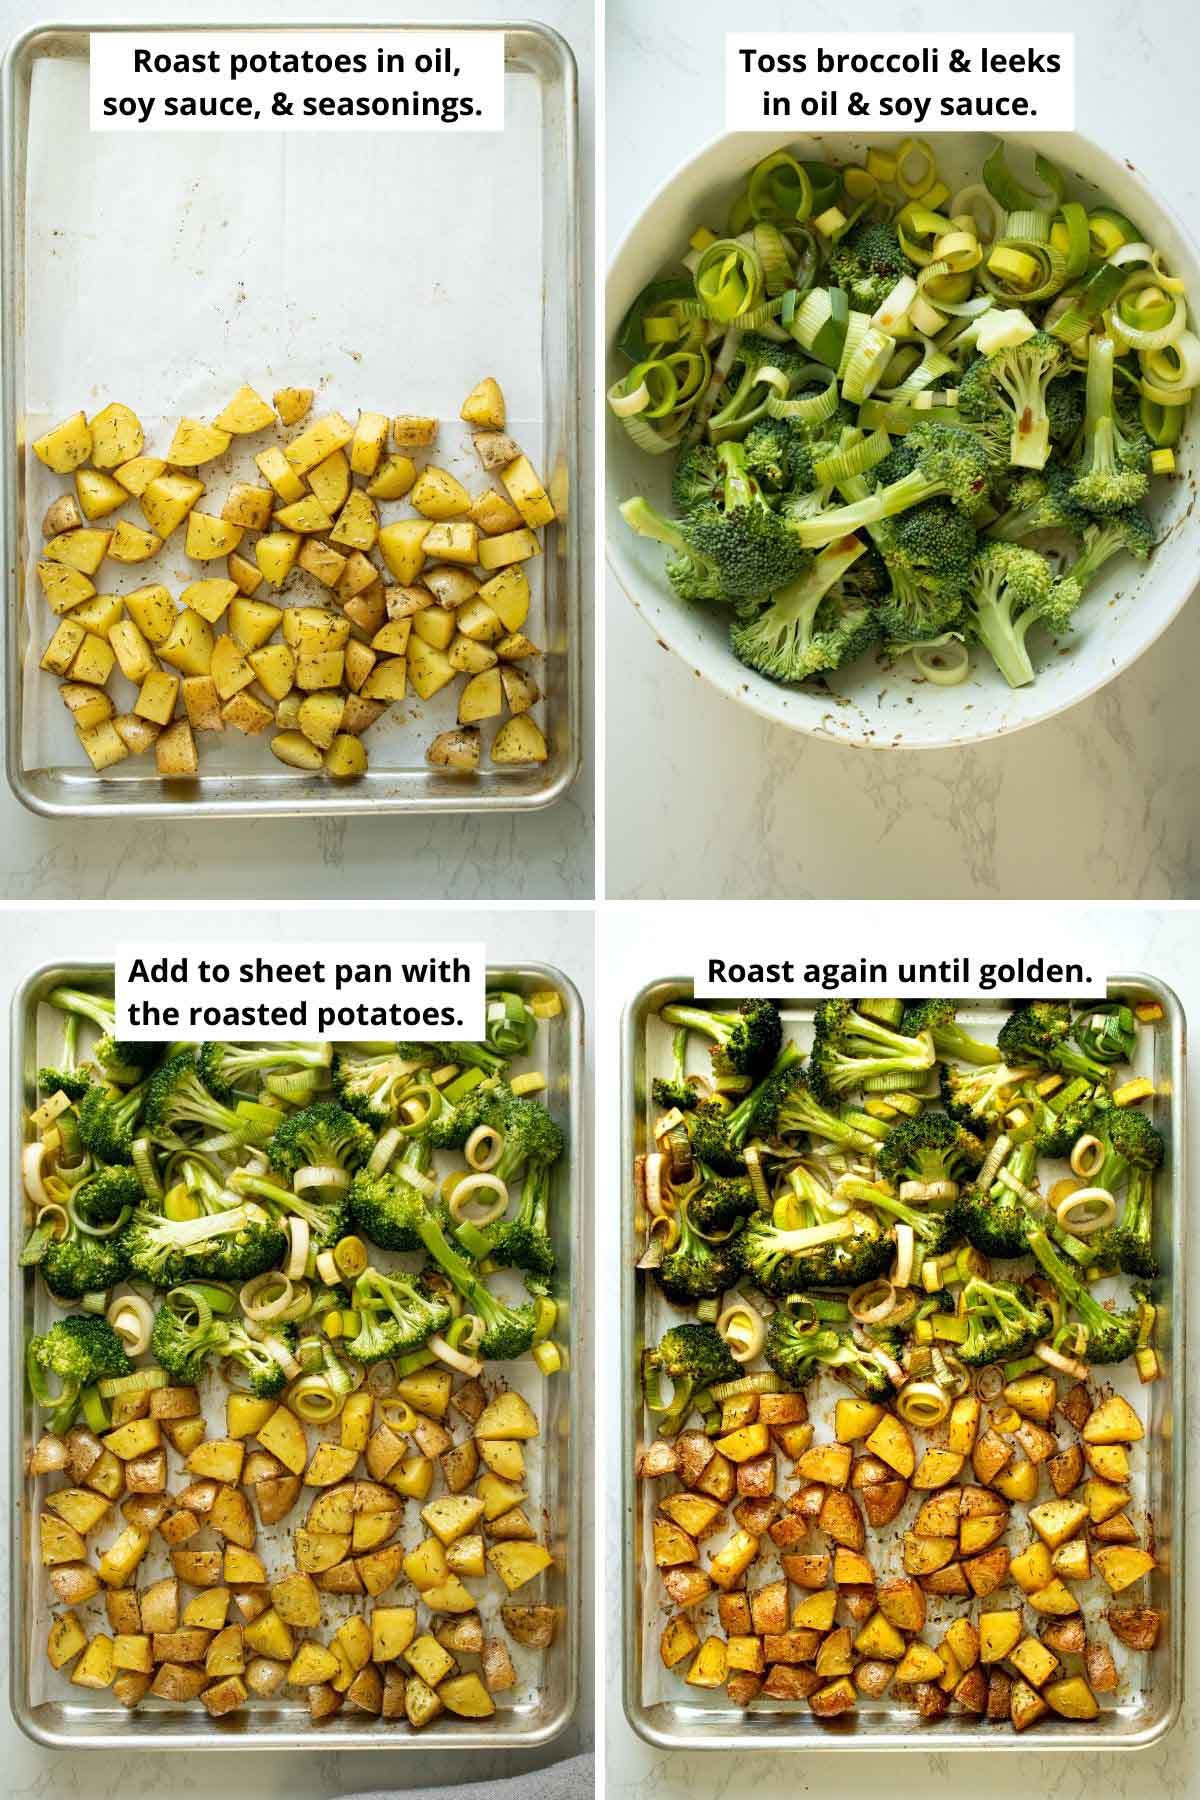 image collage of potatoes on half of the baking pan, mixing the broccoli with oil and soy sauce, the broccoli added to the pan with partially-cooked potatoes, and the veggies all done roasting